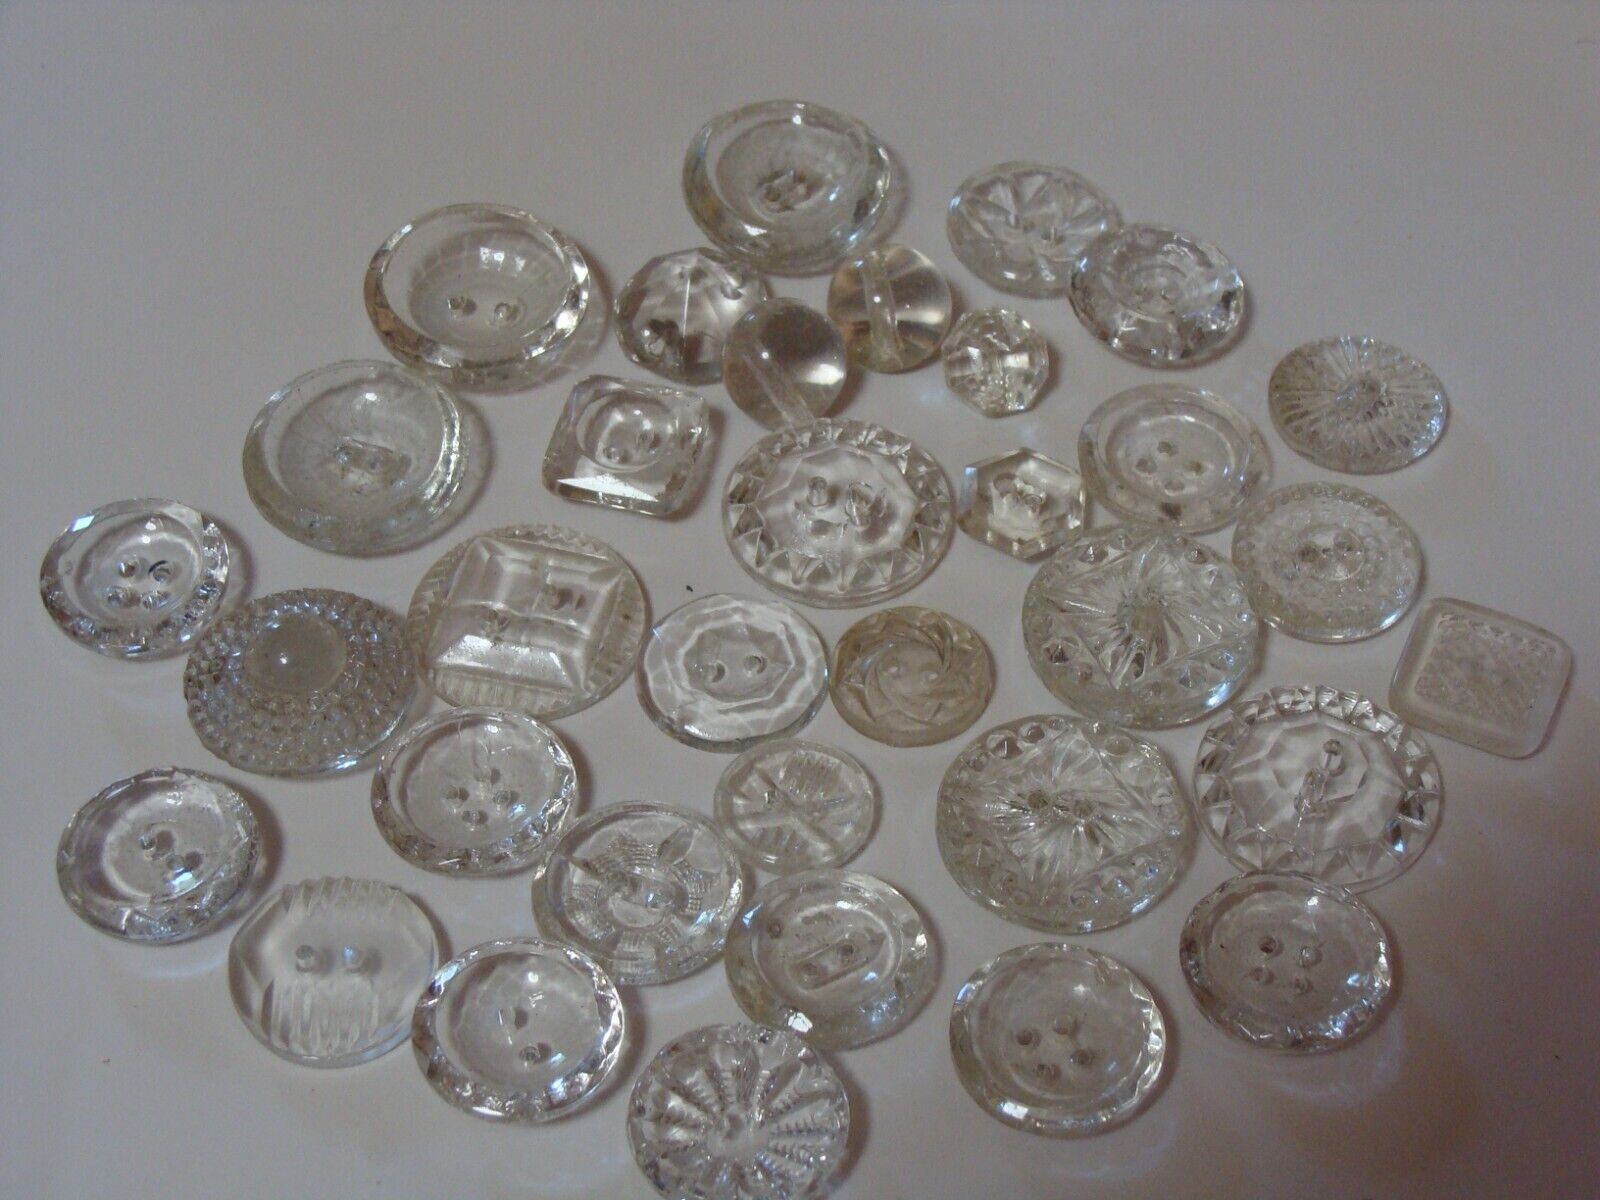 Antique Vtg Clear Crystal Depression Glass Buttons Patterns Assorted Lot of 40+ 